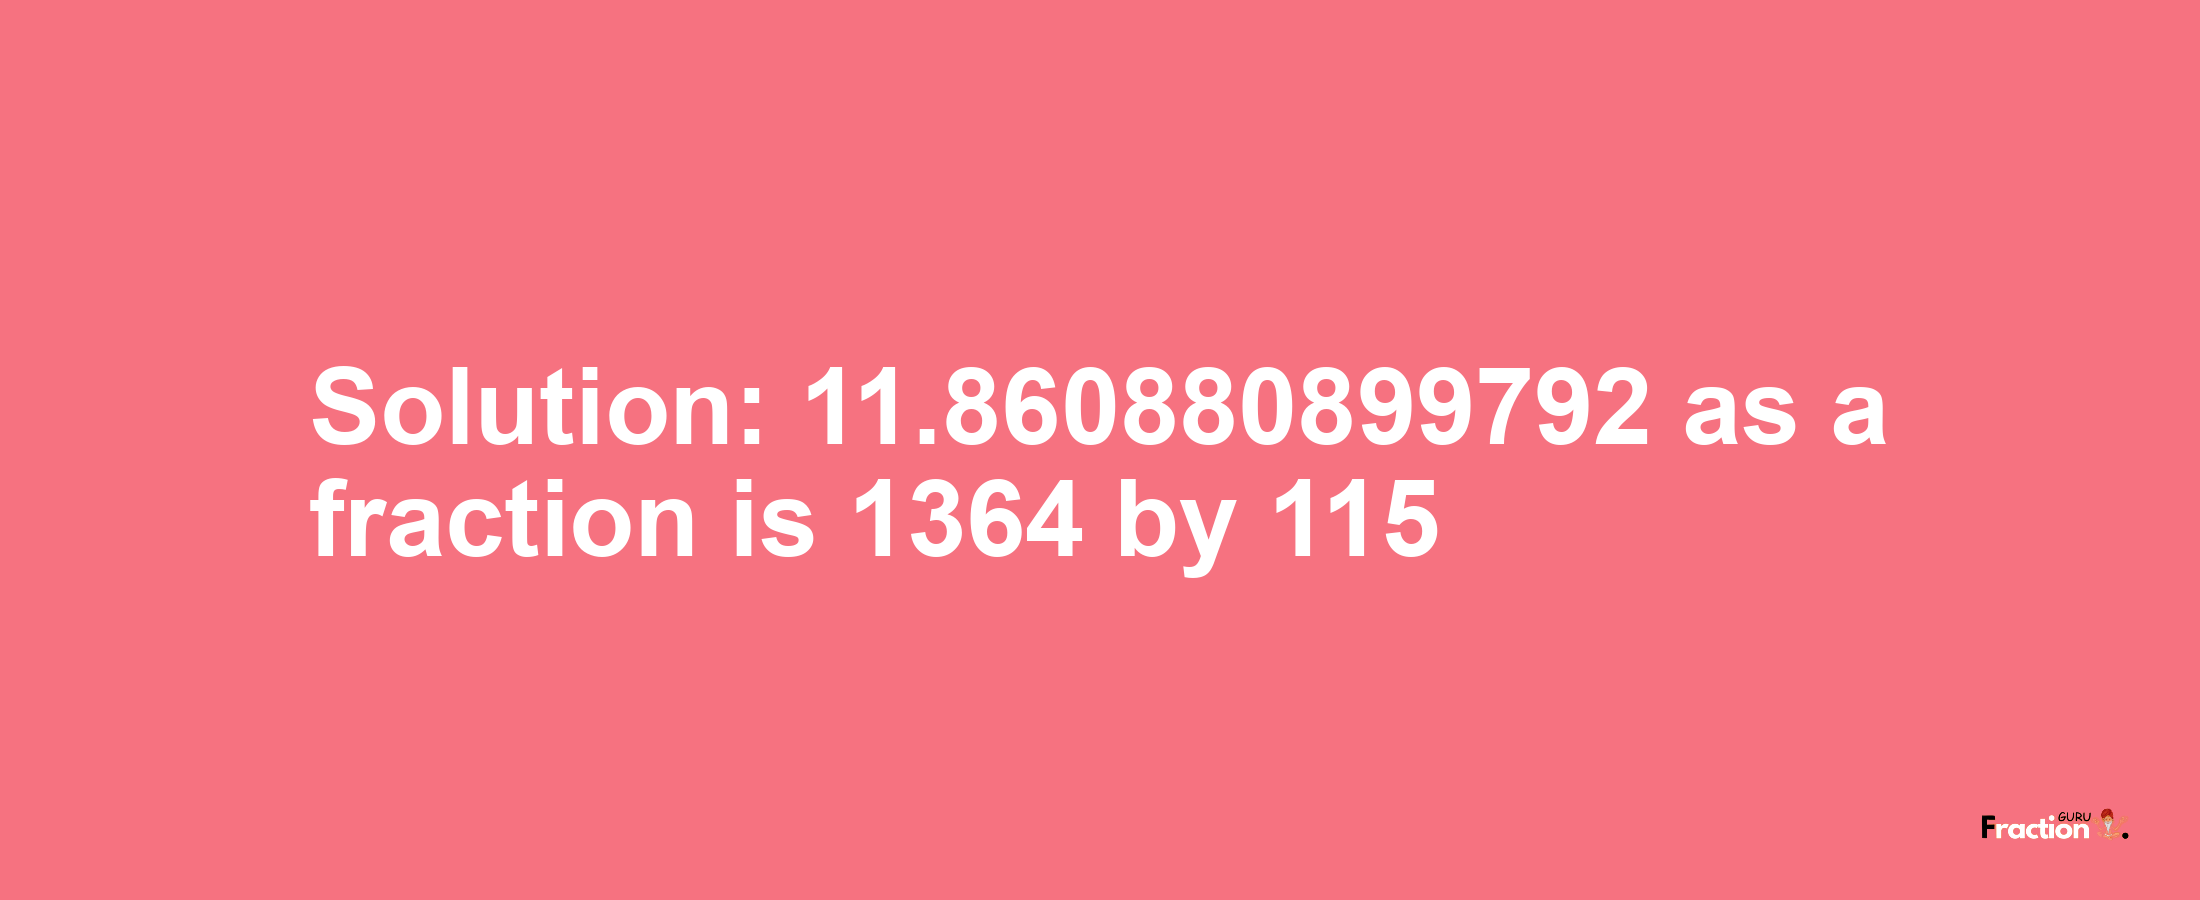 Solution:11.860880899792 as a fraction is 1364/115